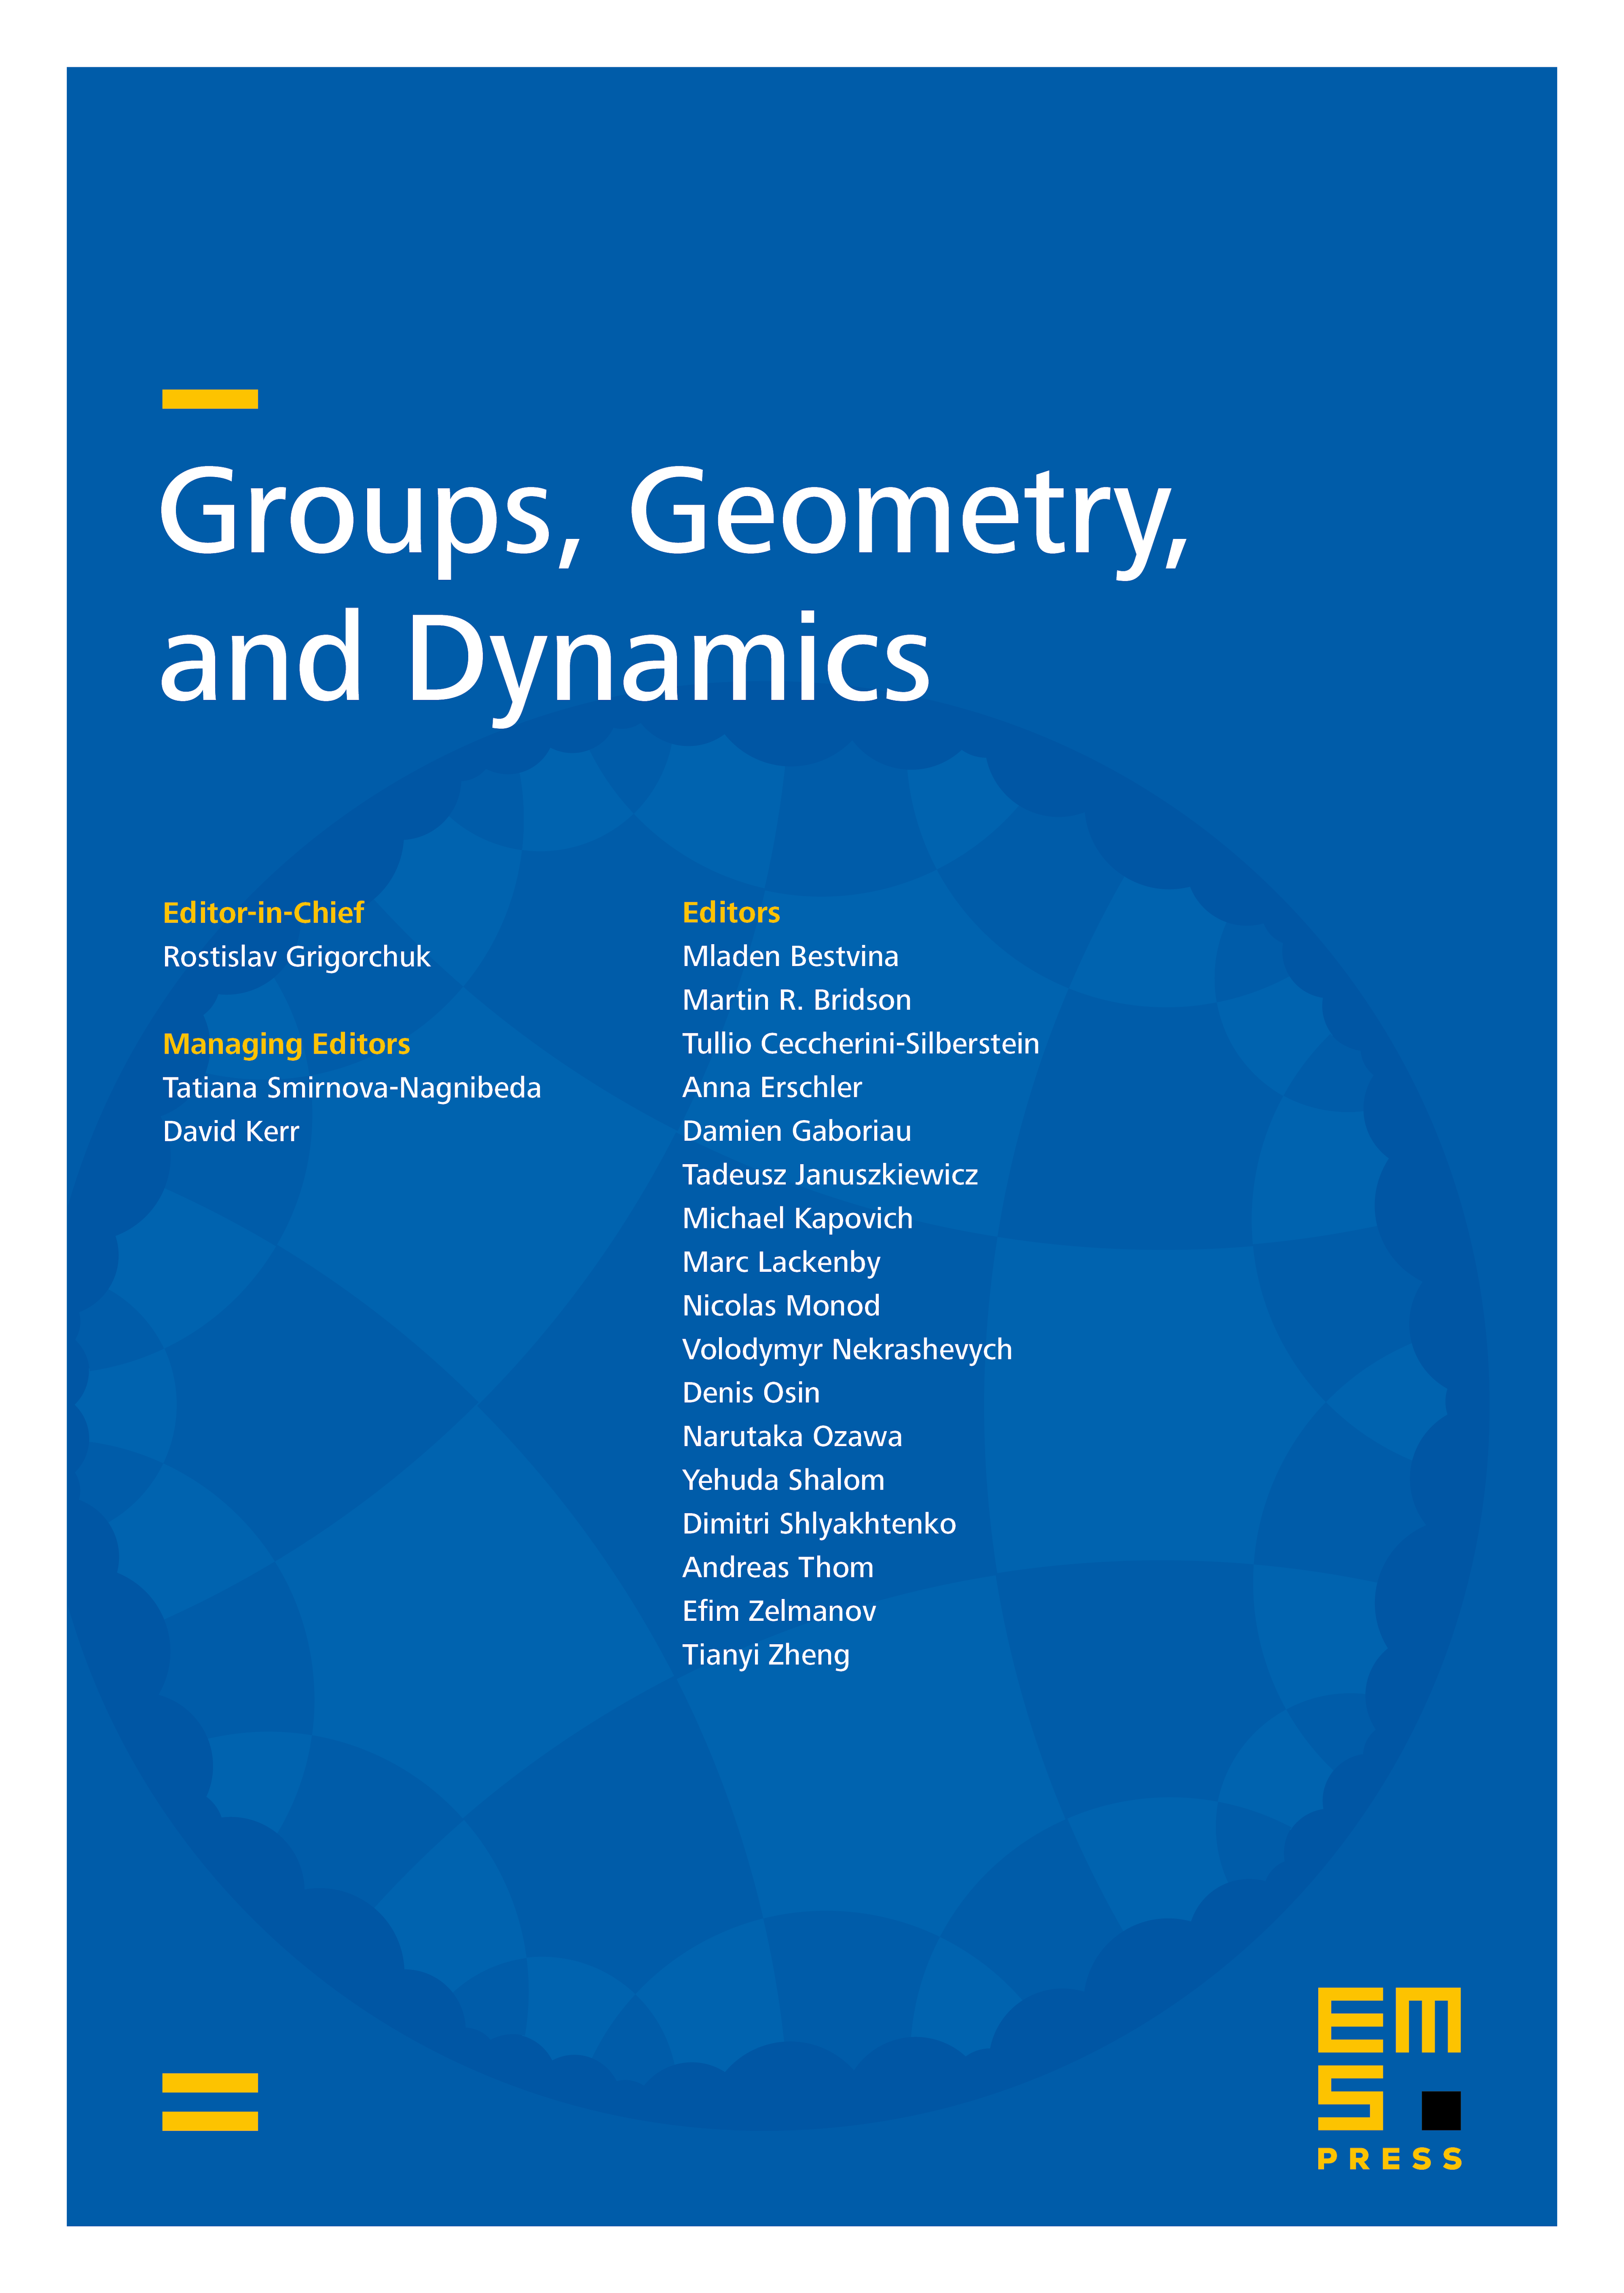 On geodesic homotopies of controlled width and conjugacies in isometry groups cover